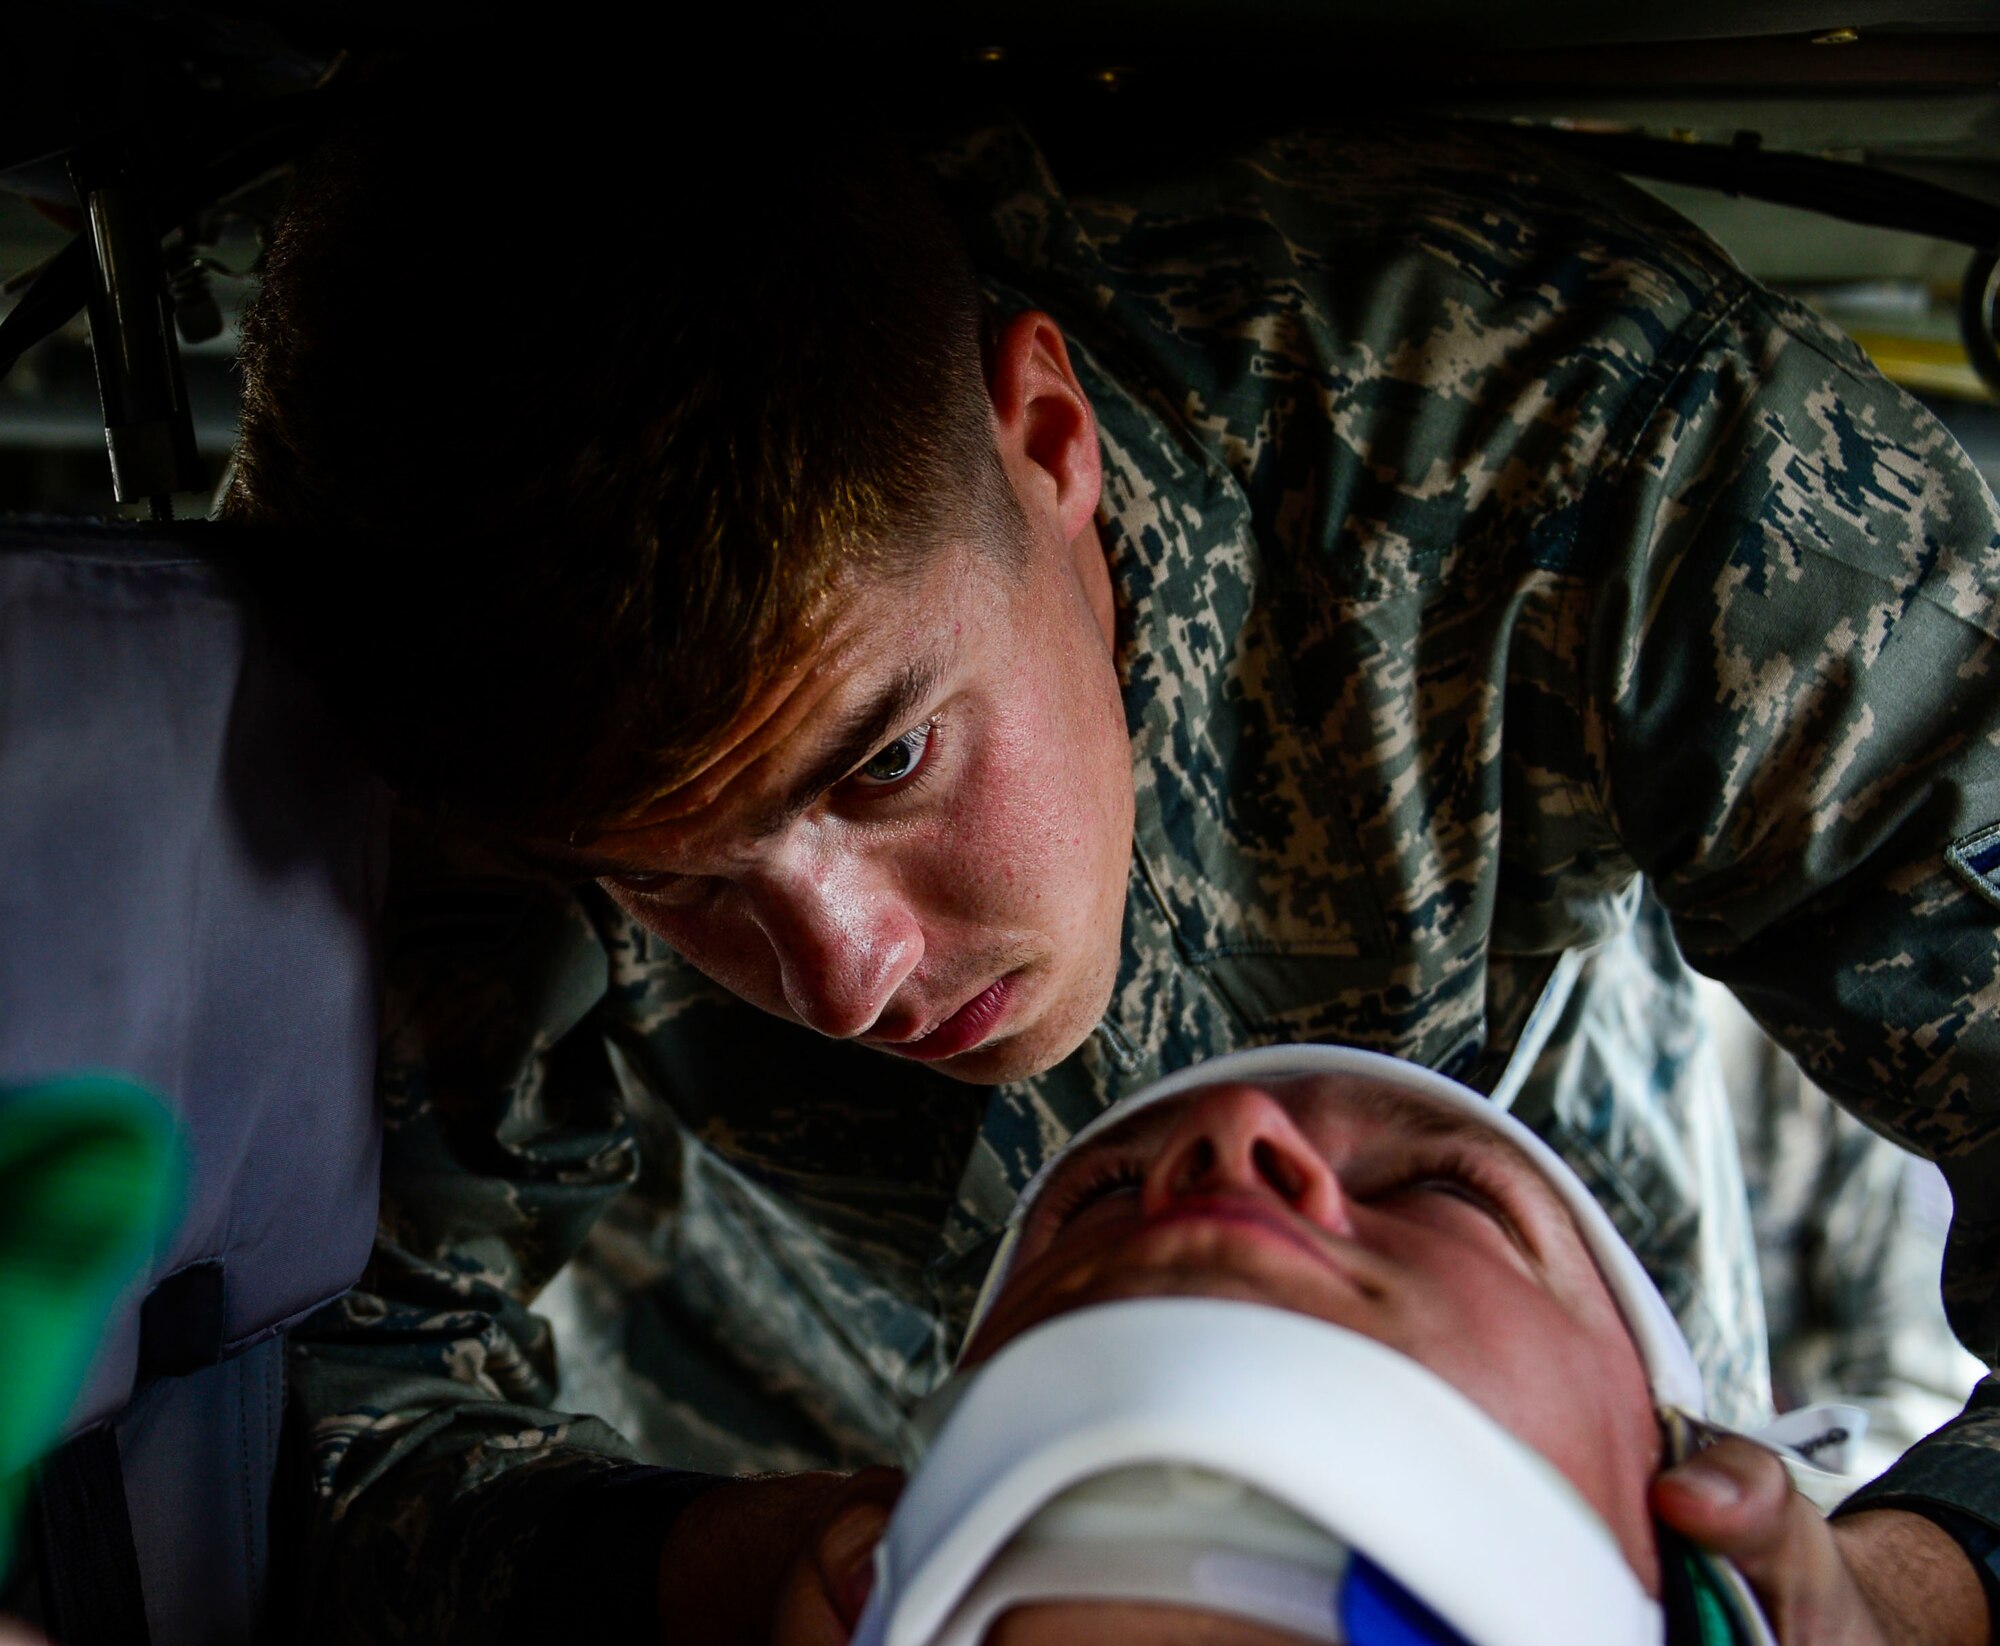 U.S. Air Force Airman 1st Class Gregory Pease, 612th Air Base Squadron firefighter, braces U.S. Air Force Staff Sgt. Daniel Easterlund’s neck during aircraft crash rescue training at Soto Cano Air Base, Honduras, Jan. 15, 2015.  At least once a quarter, the 612th ABS teams up with the 1-228th Aviation Regiment to review aircraft crash rescue training and emergency procedures for the UH-60 Blackhawk helicopter. (U.S. Air Force photo/Tech. Sgt. Heather Redman)